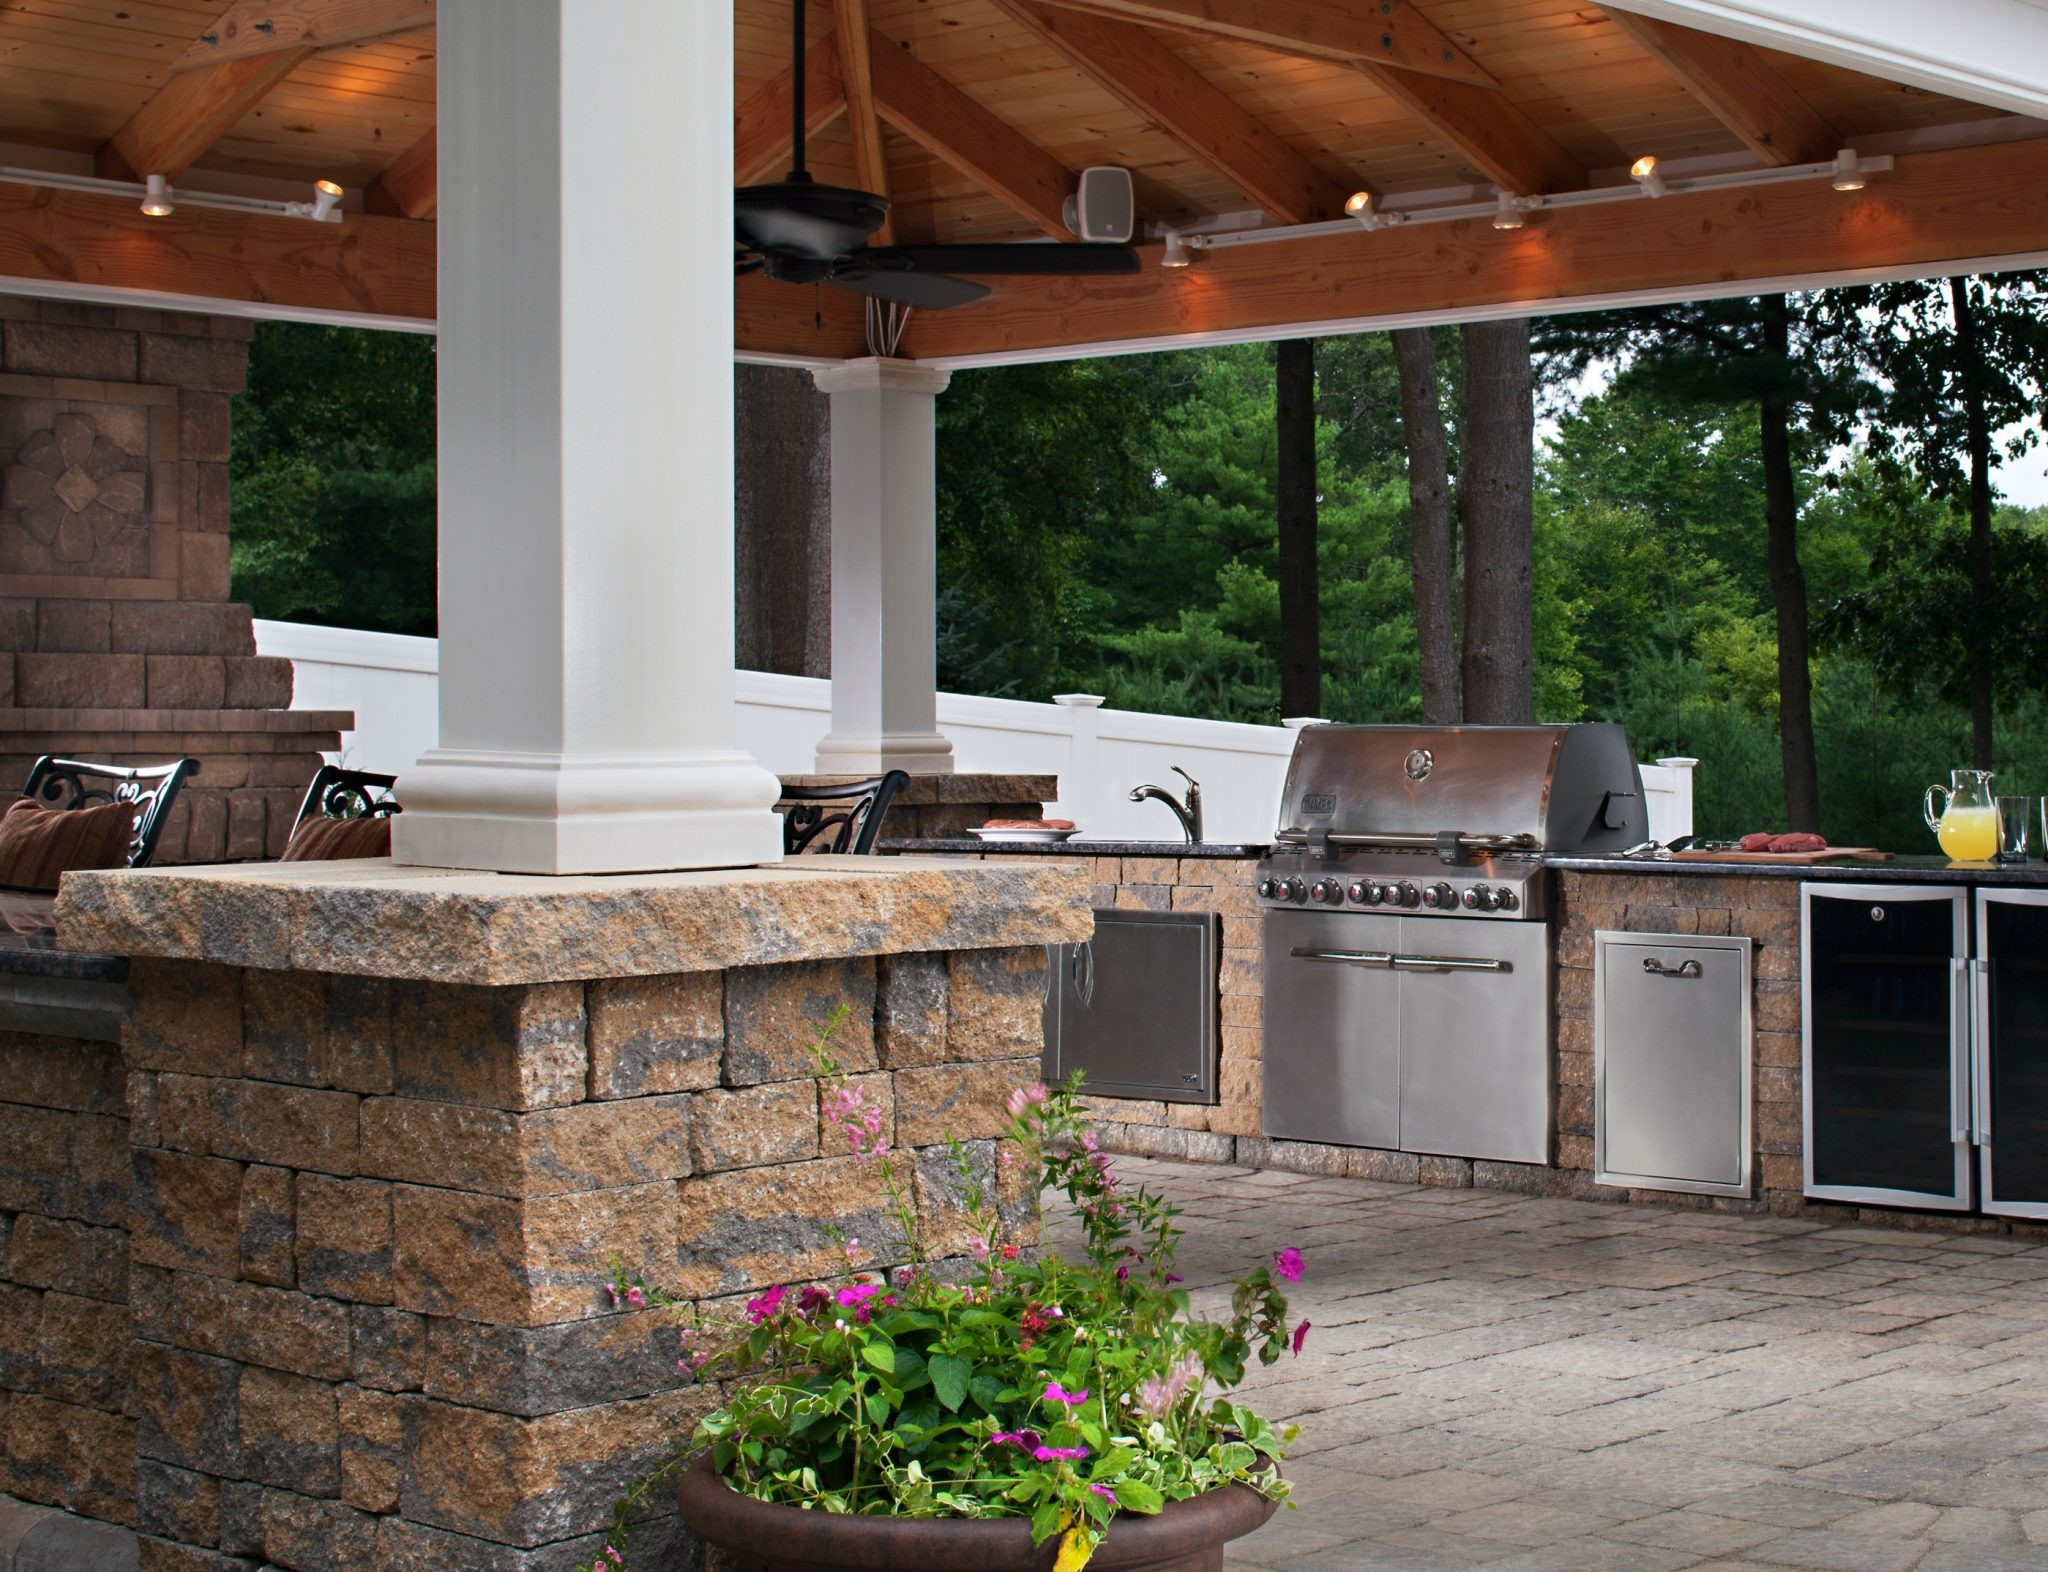 Outdoor Kitchen And Patio
 Outdoor Kitchen Trends 9 HOT Ideas For Your Backyard